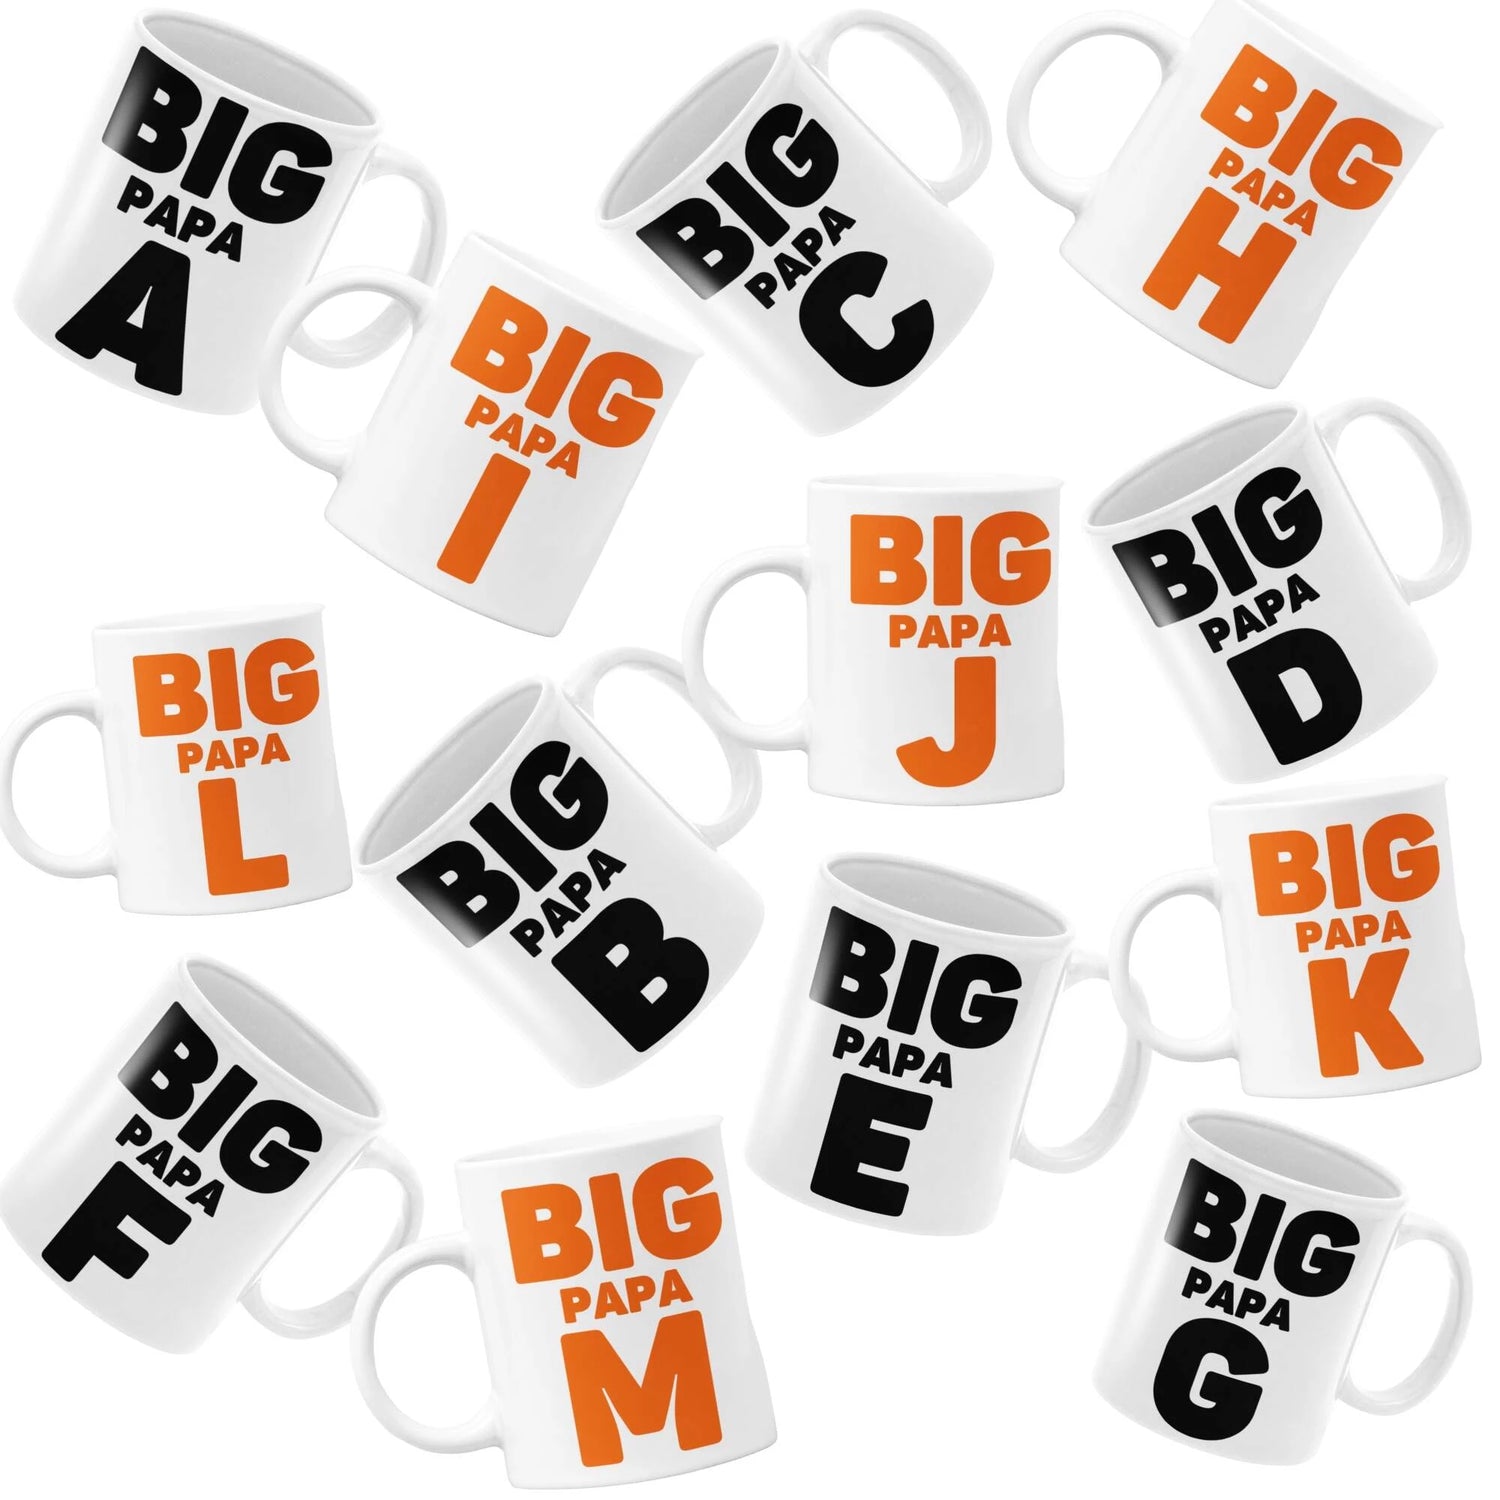 Big Papa Mugs available for all dads according to their initials - Best birthday Father's Day gift - Da Boss Mango